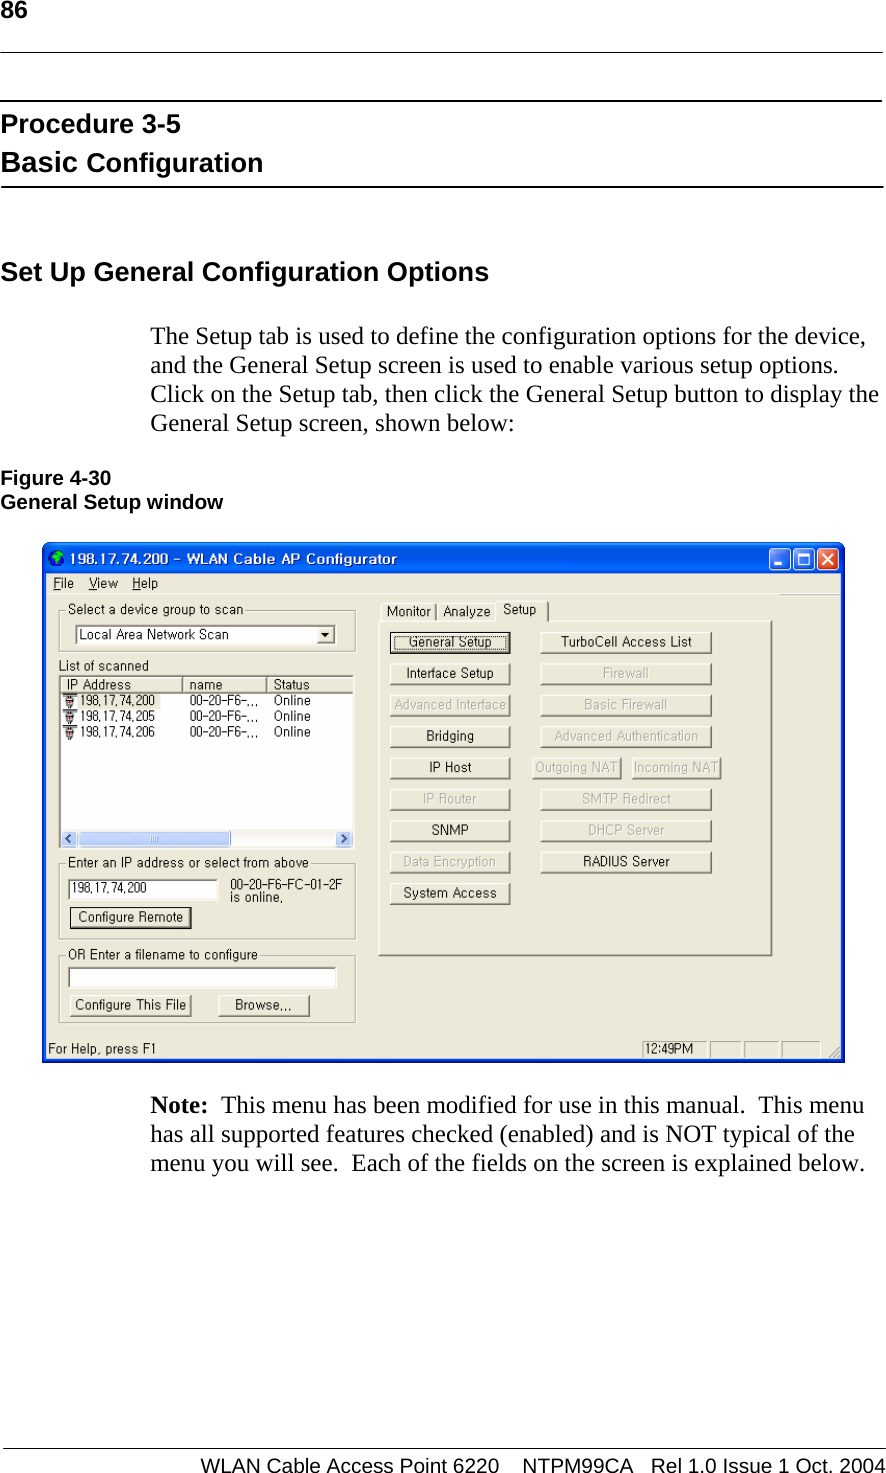   86   Procedure 3-5 Basic Configuration   Set Up General Configuration Options  The Setup tab is used to define the configuration options for the device, and the General Setup screen is used to enable various setup options.  Click on the Setup tab, then click the General Setup button to display the General Setup screen, shown below:  Figure 4-30 General Setup window    Note:  This menu has been modified for use in this manual.  This menu has all supported features checked (enabled) and is NOT typical of the menu you will see.  Each of the fields on the screen is explained below.  WLAN Cable Access Point 6220    NTPM99CA   Rel 1.0 Issue 1 Oct. 2004